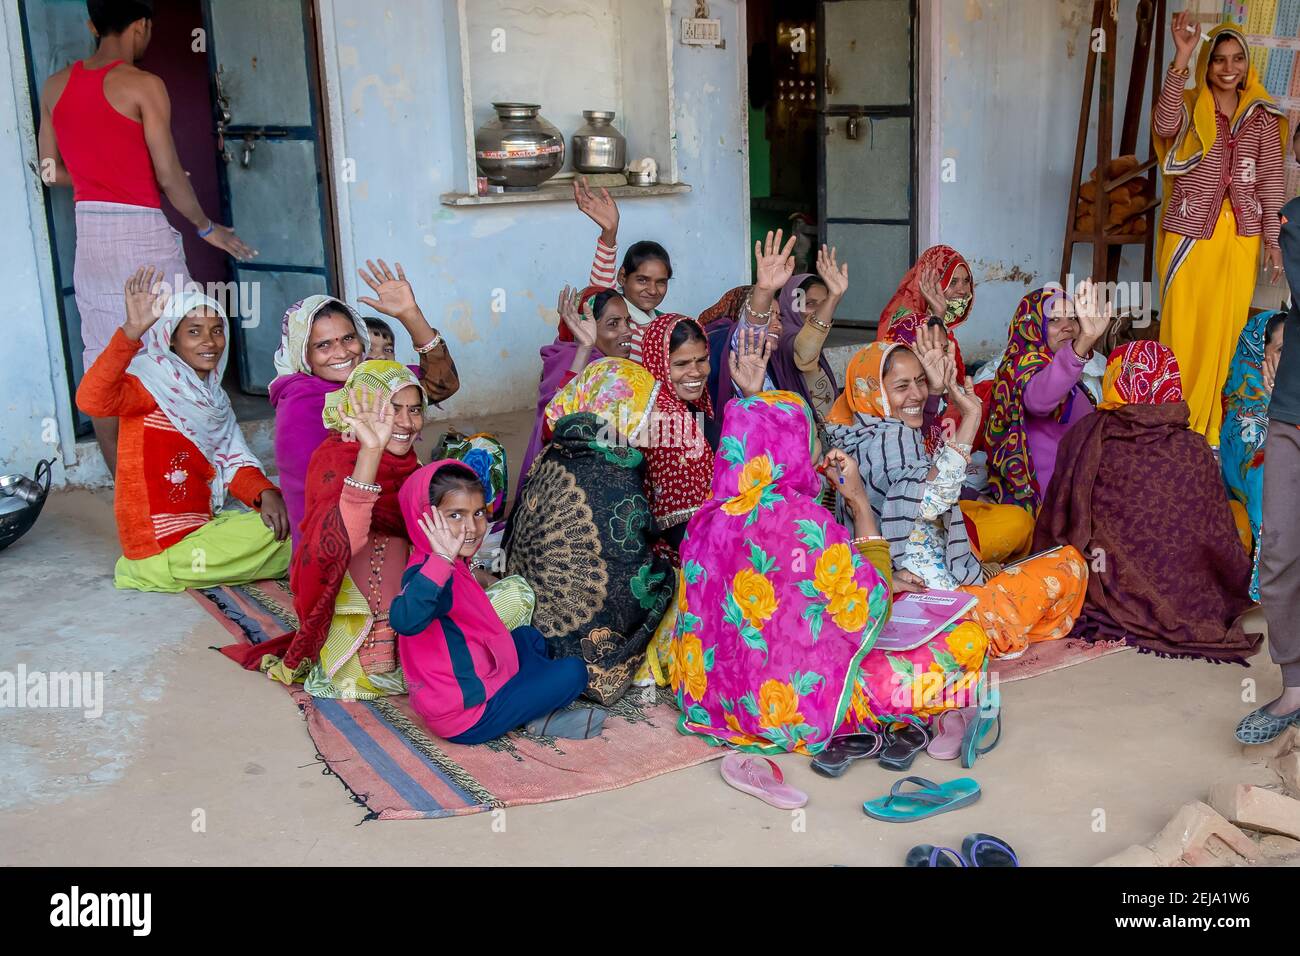 Uttar Pradesh. 05-15-2018. Women working in the textile industry wave goodbye happily. Women apart of taking care of children, they have an important Stock Photo